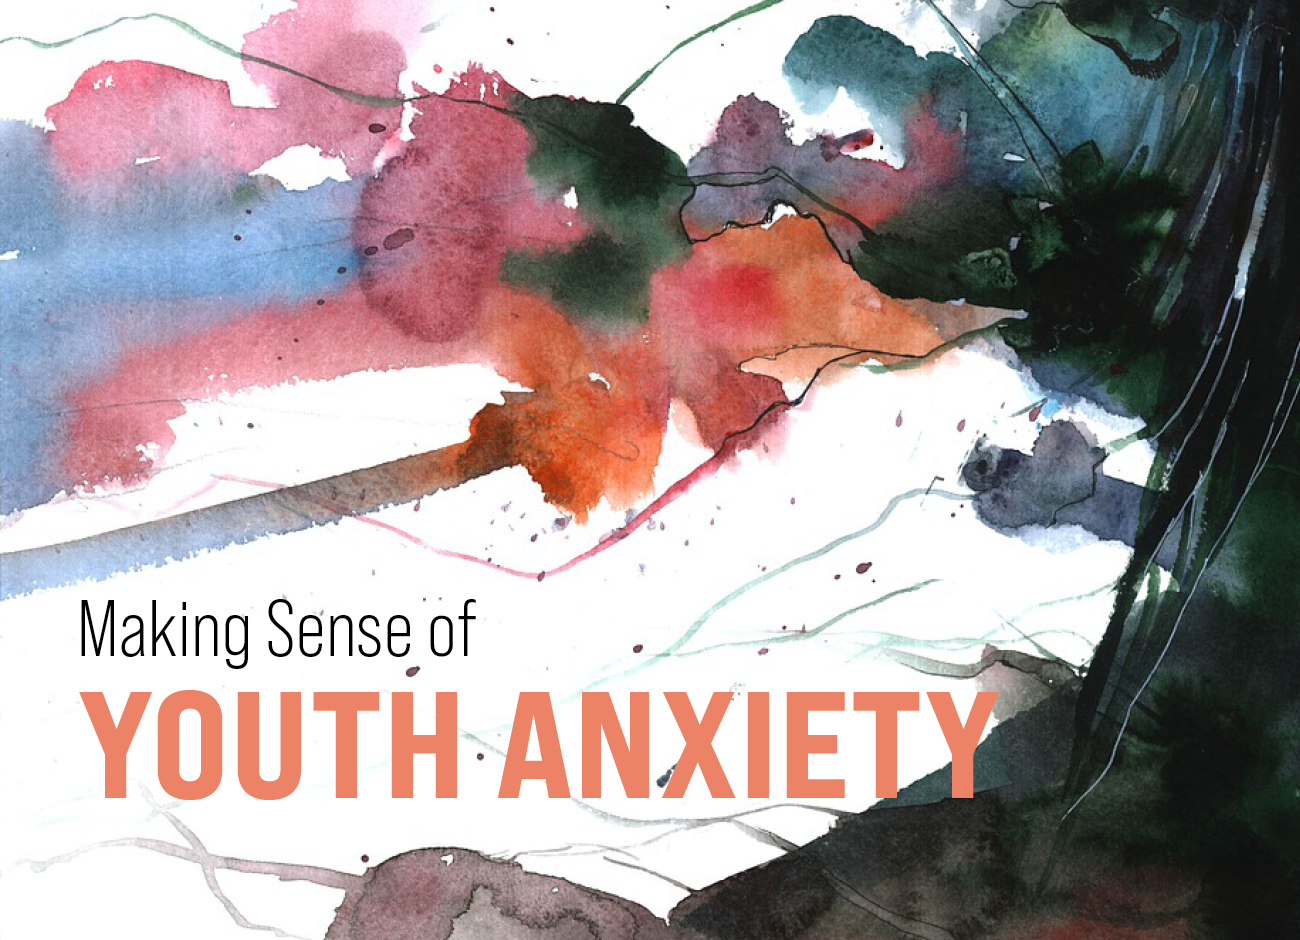 watercolor inkblots in orange, pink, blue and green with text: Making Sense of Youth Anxiety